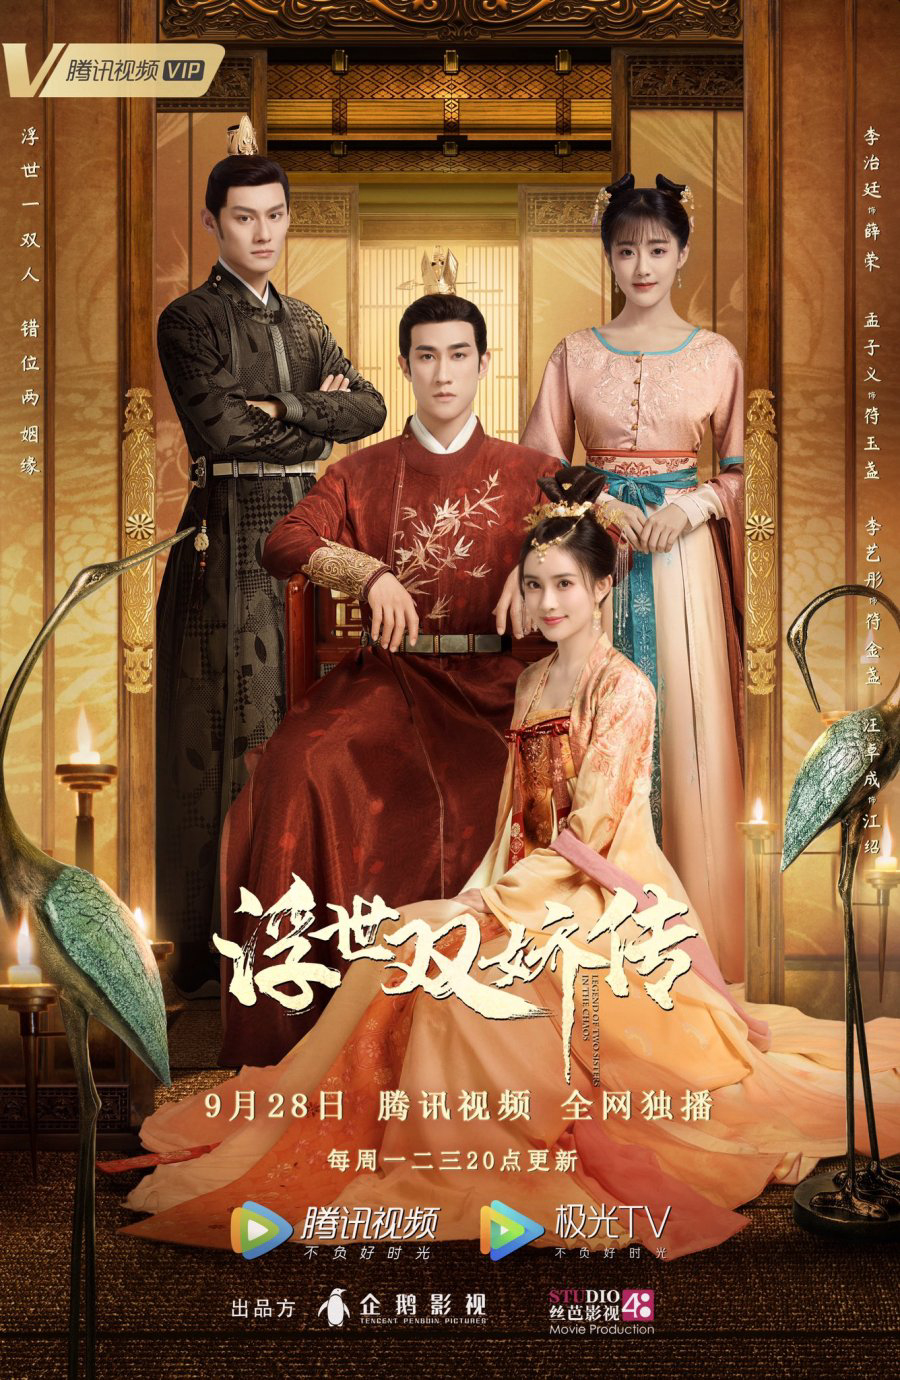 Poster Phim Phù Thế Song Kiều Truyện (Legends of the two Sisters in the Chao)